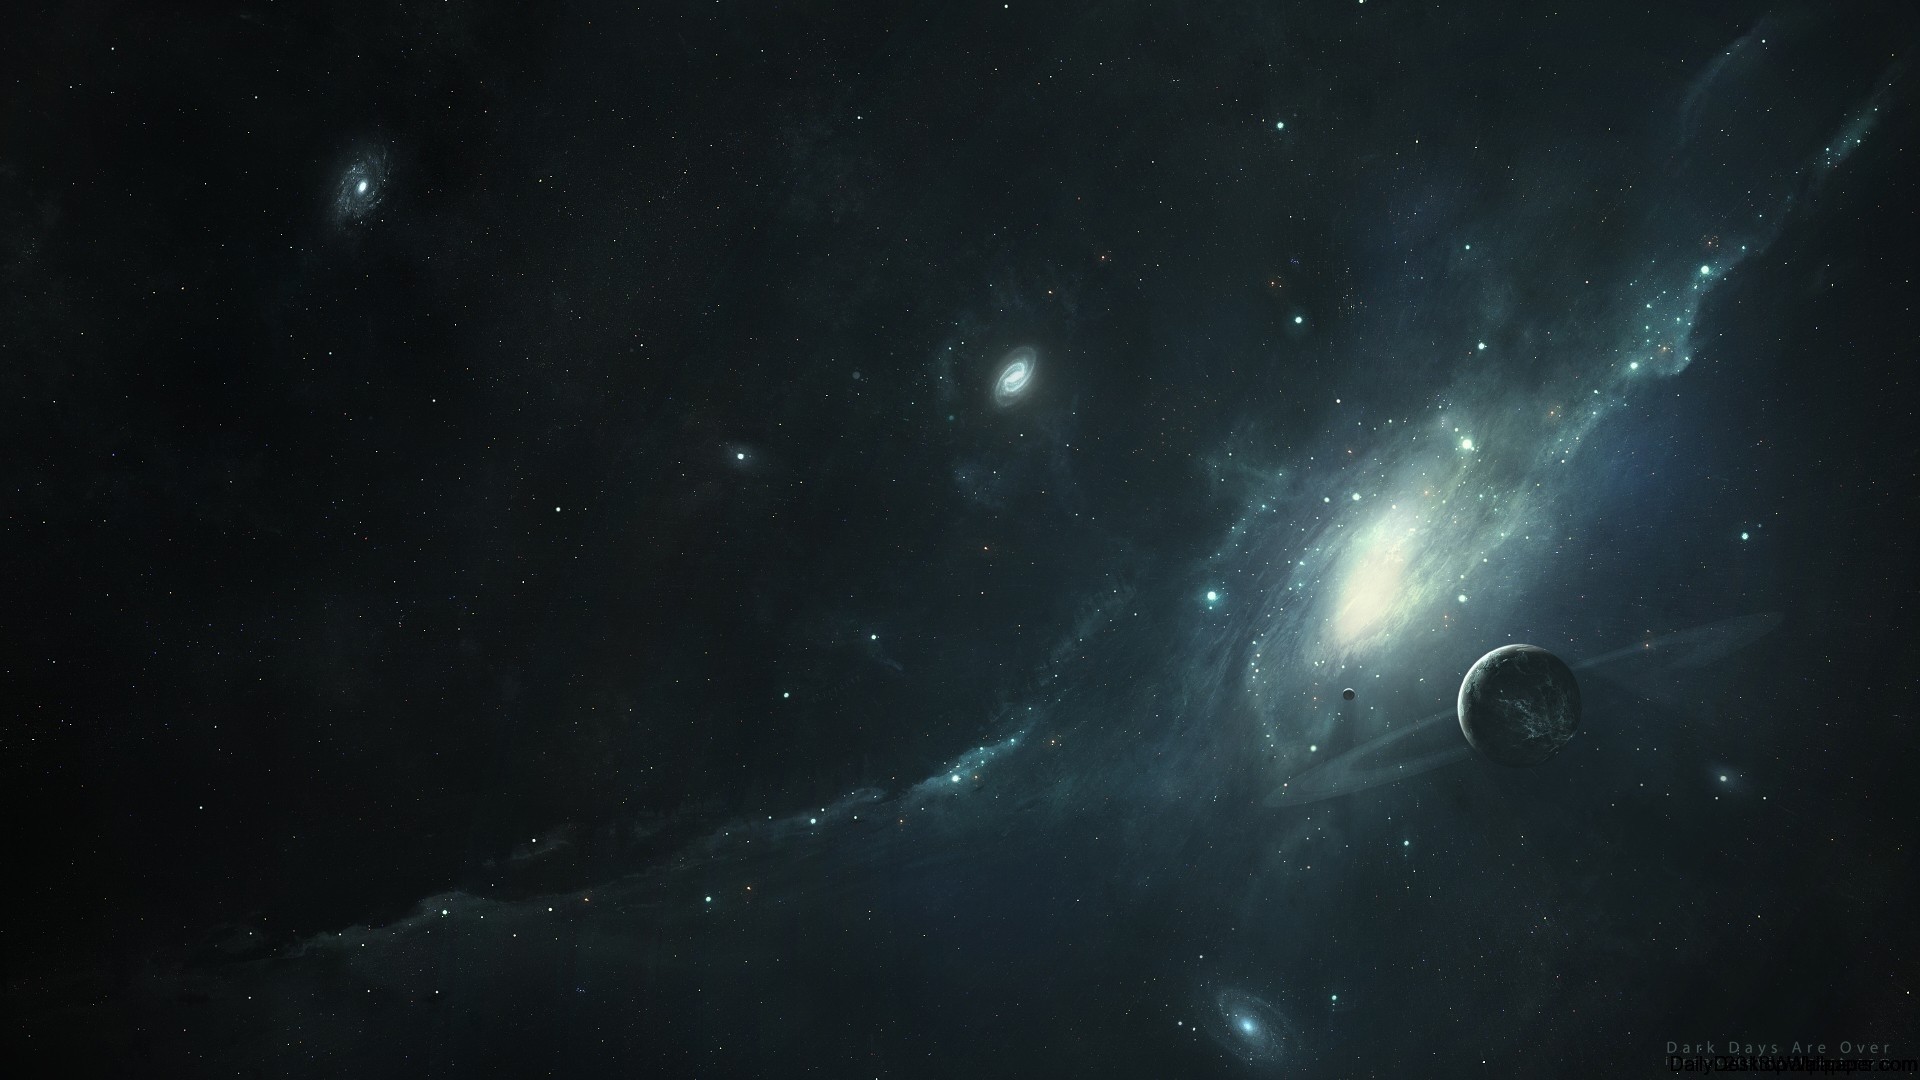 1920x1080 Title : outer space wallpaper – hd wallpapers. Dimension : 1920 x 1080.  File Type : JPG/JPEG